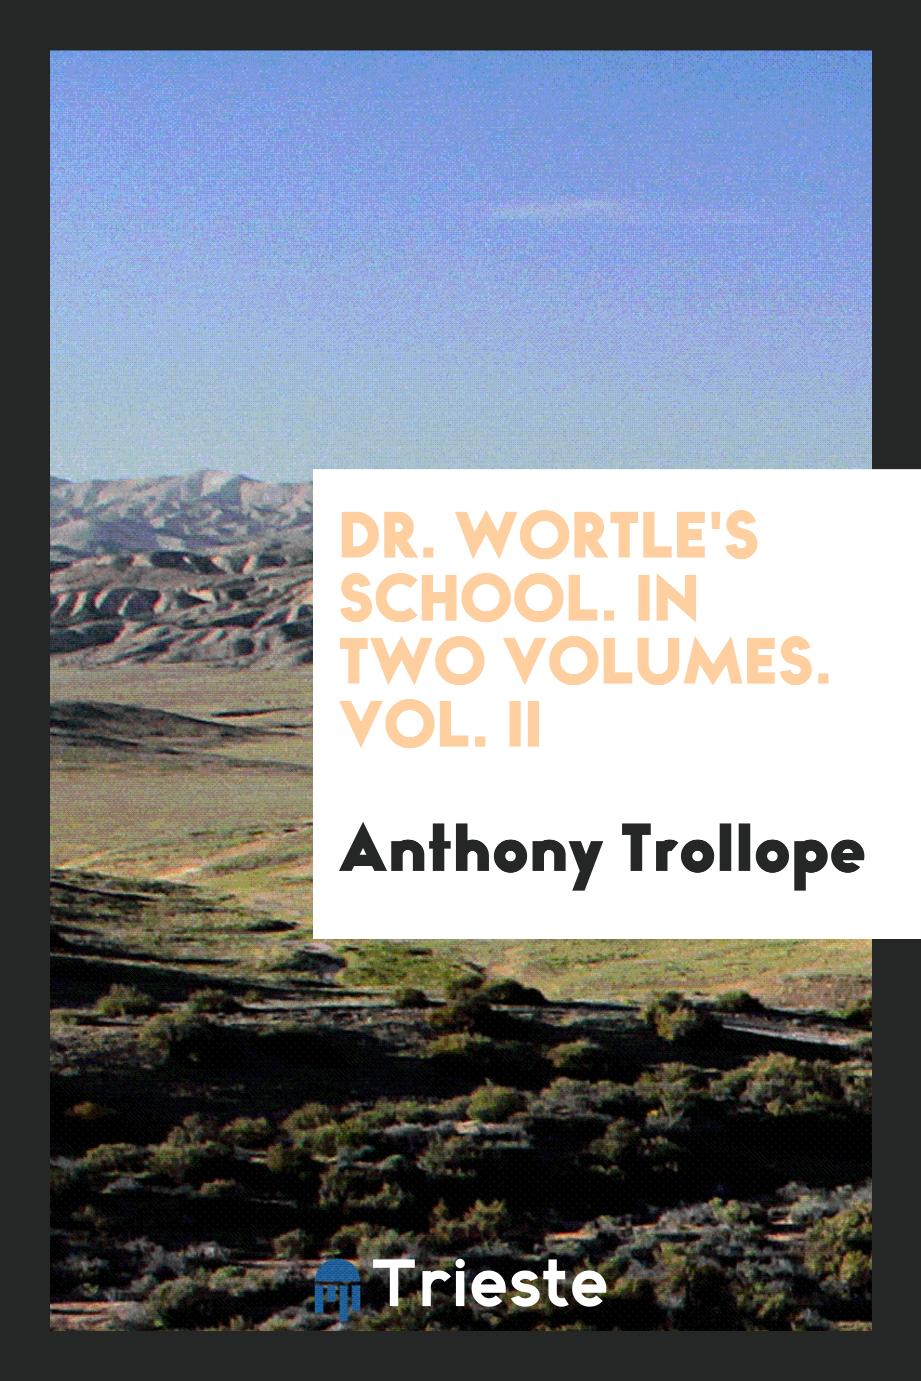 Anthony Trollope - Dr. Wortle's School. In Two Volumes. Vol. II